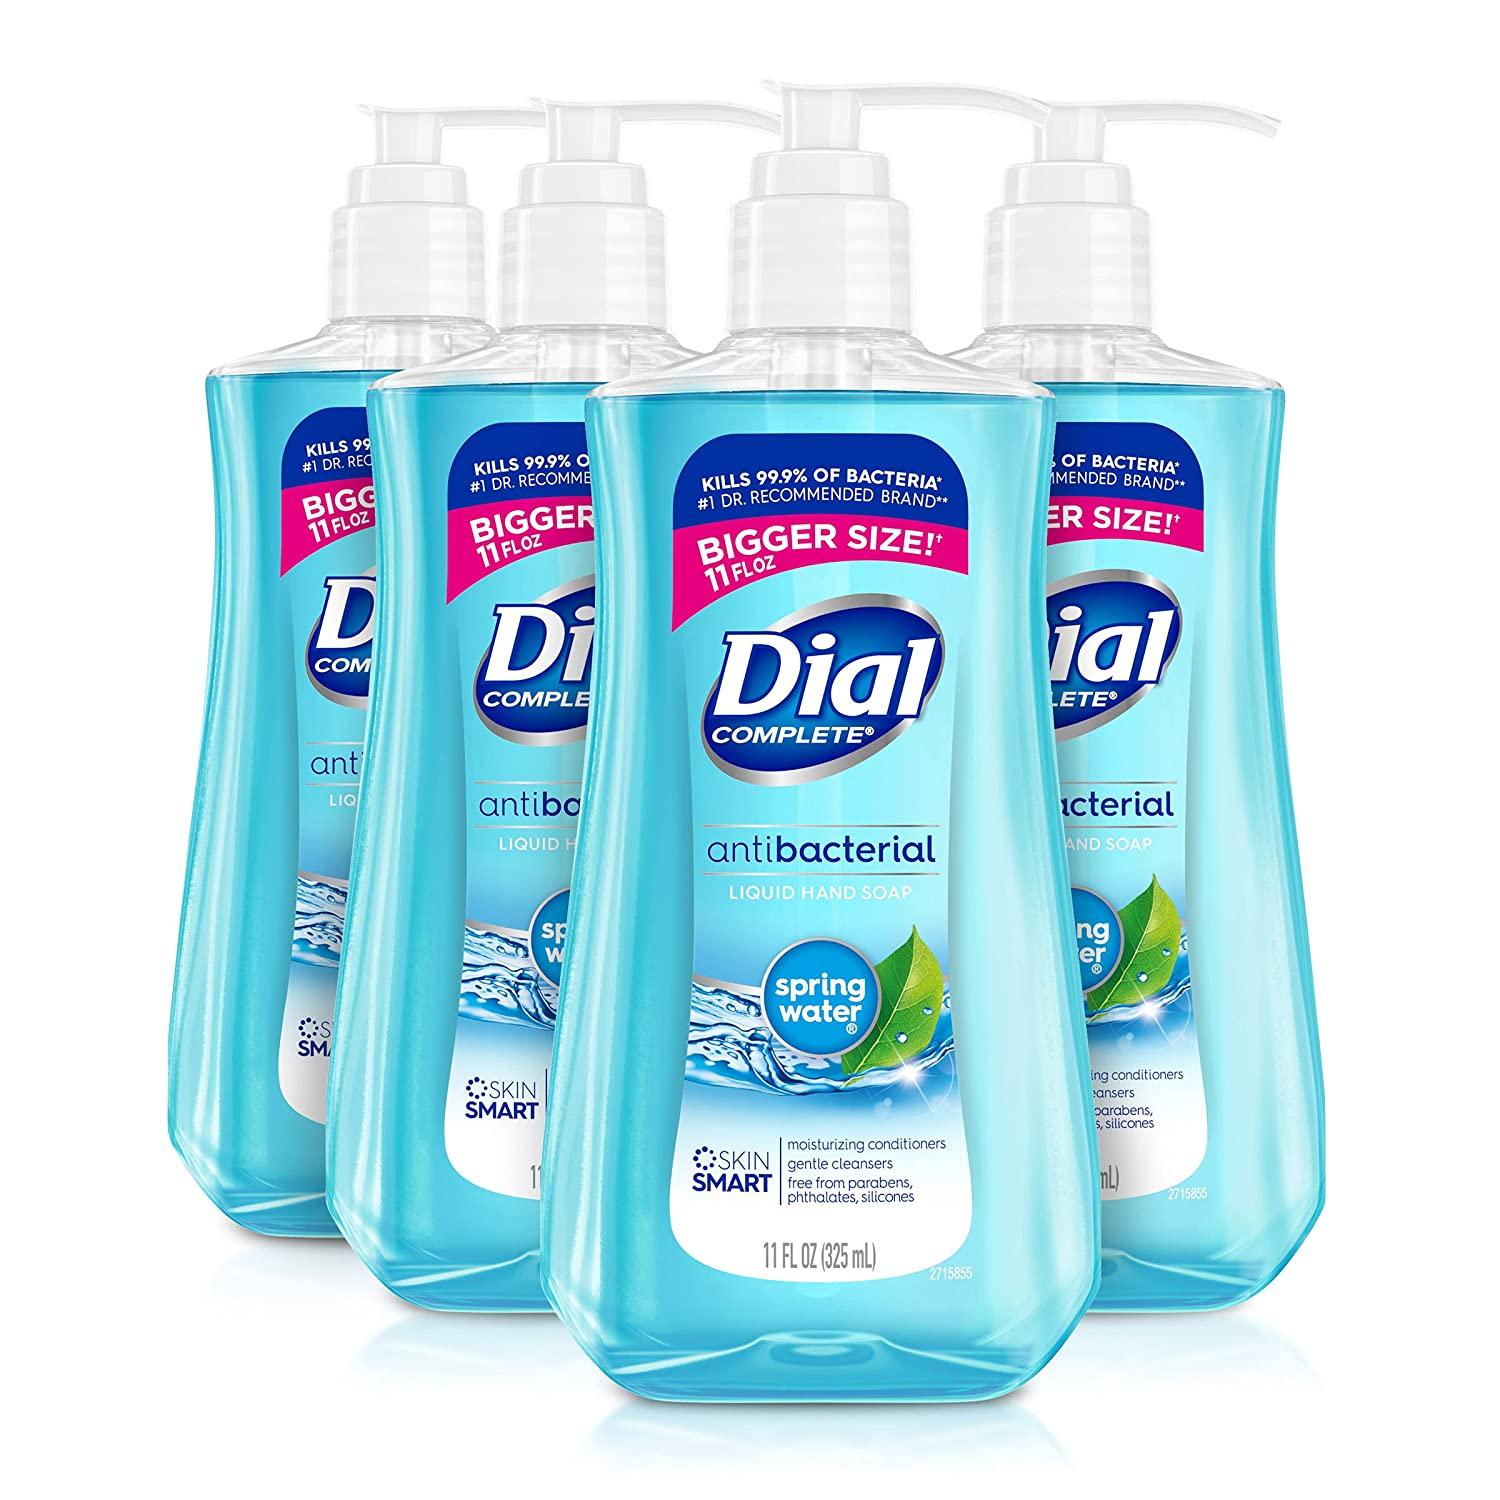 4 Dial Spring Water Antibacterial Liquid Hand Soap for $5.60 Shipped